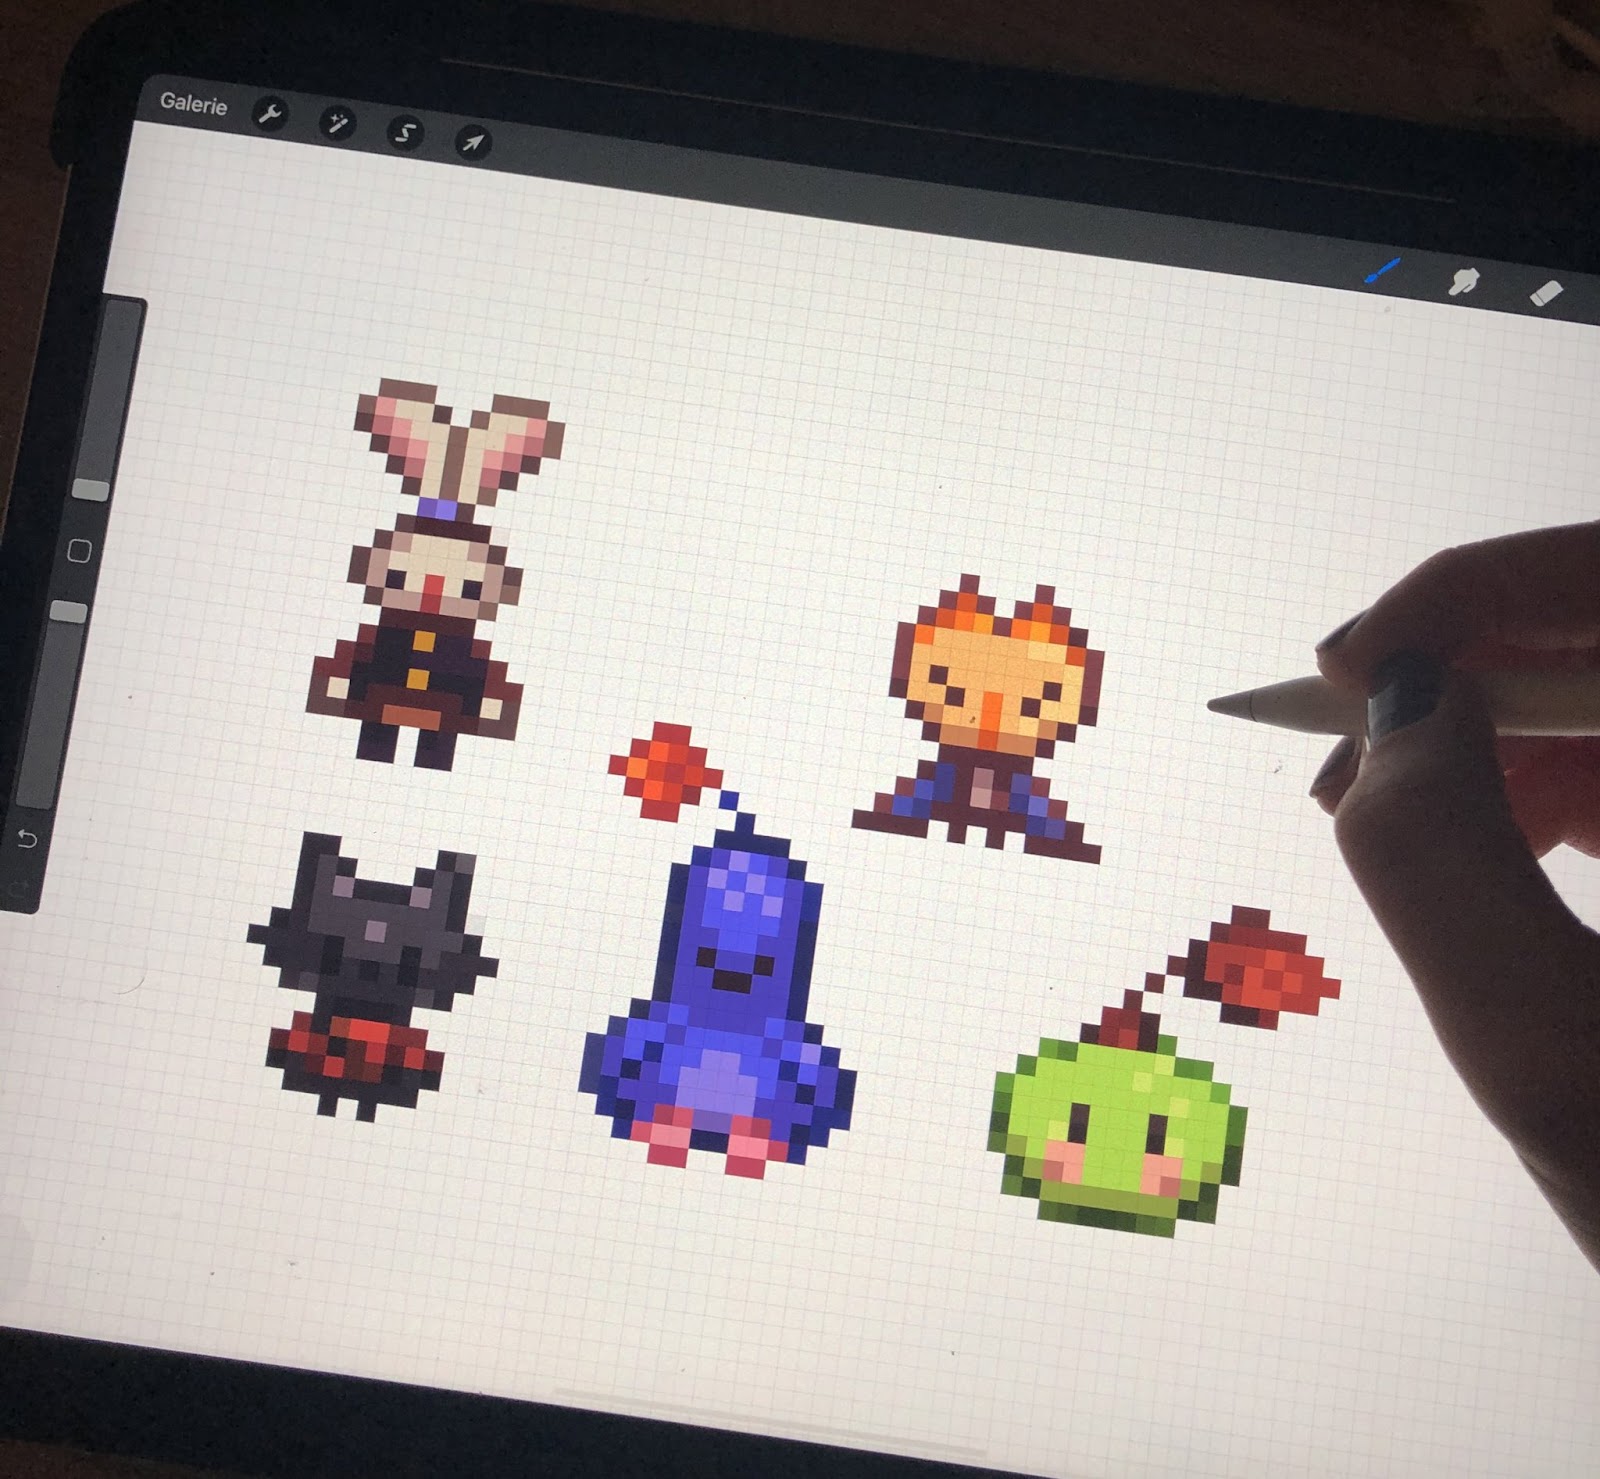 𝖓𝖆𝖉𝖎 on Twitter: "Now that I found out how to use @Procreate also for PIXEL  ART I don't know how I will ever be able to get work done again because it's